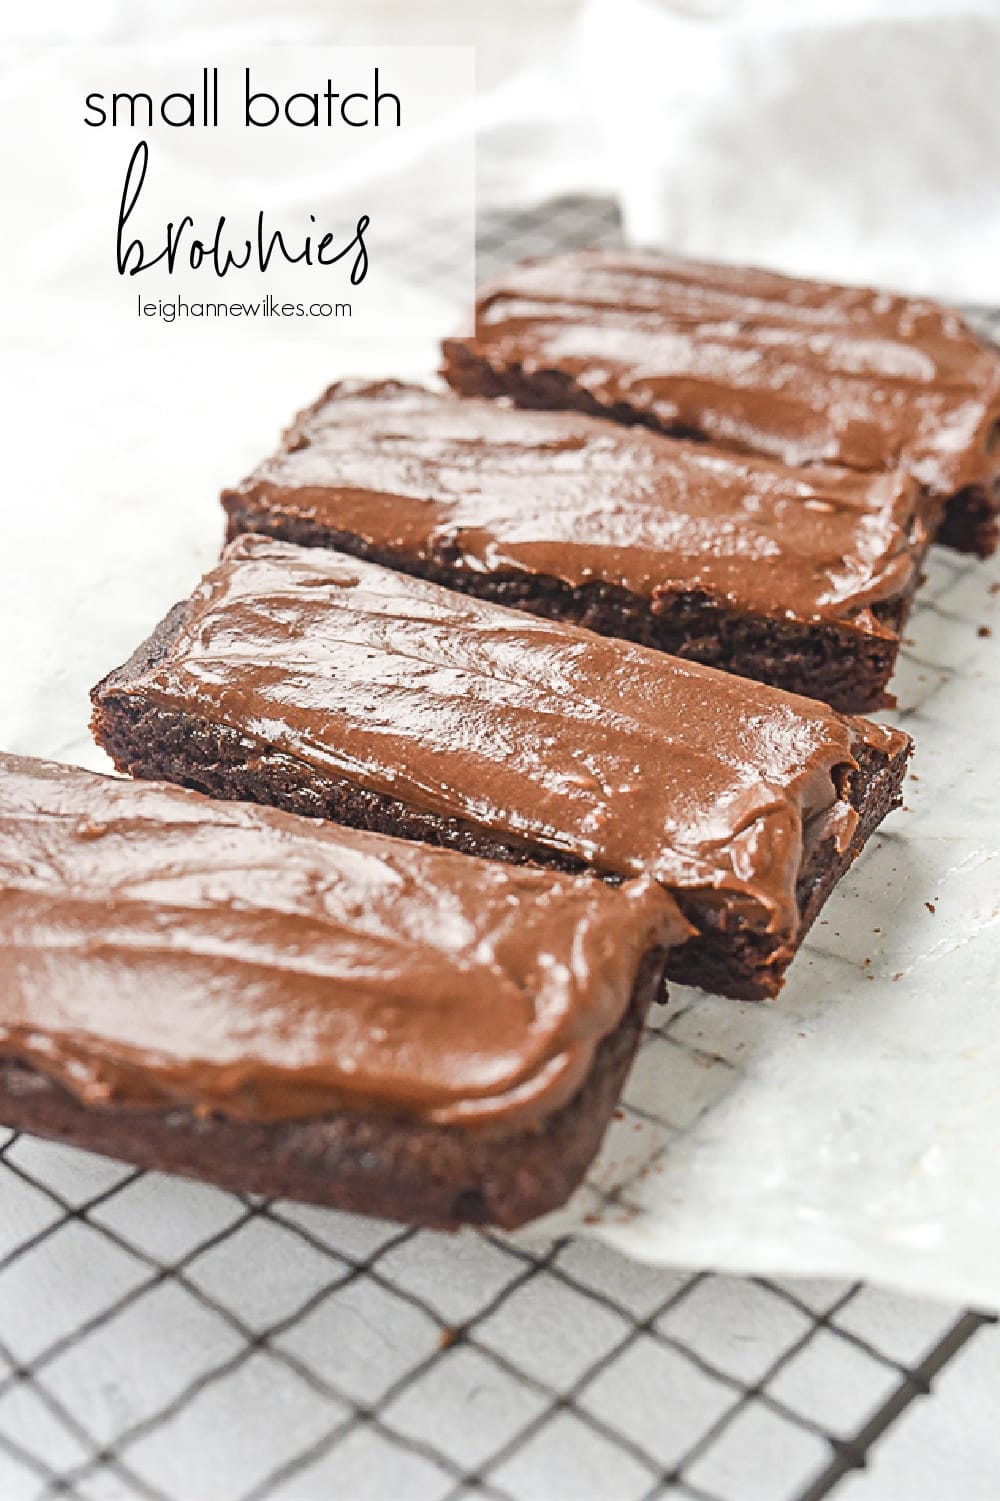 sliced small batch brownies